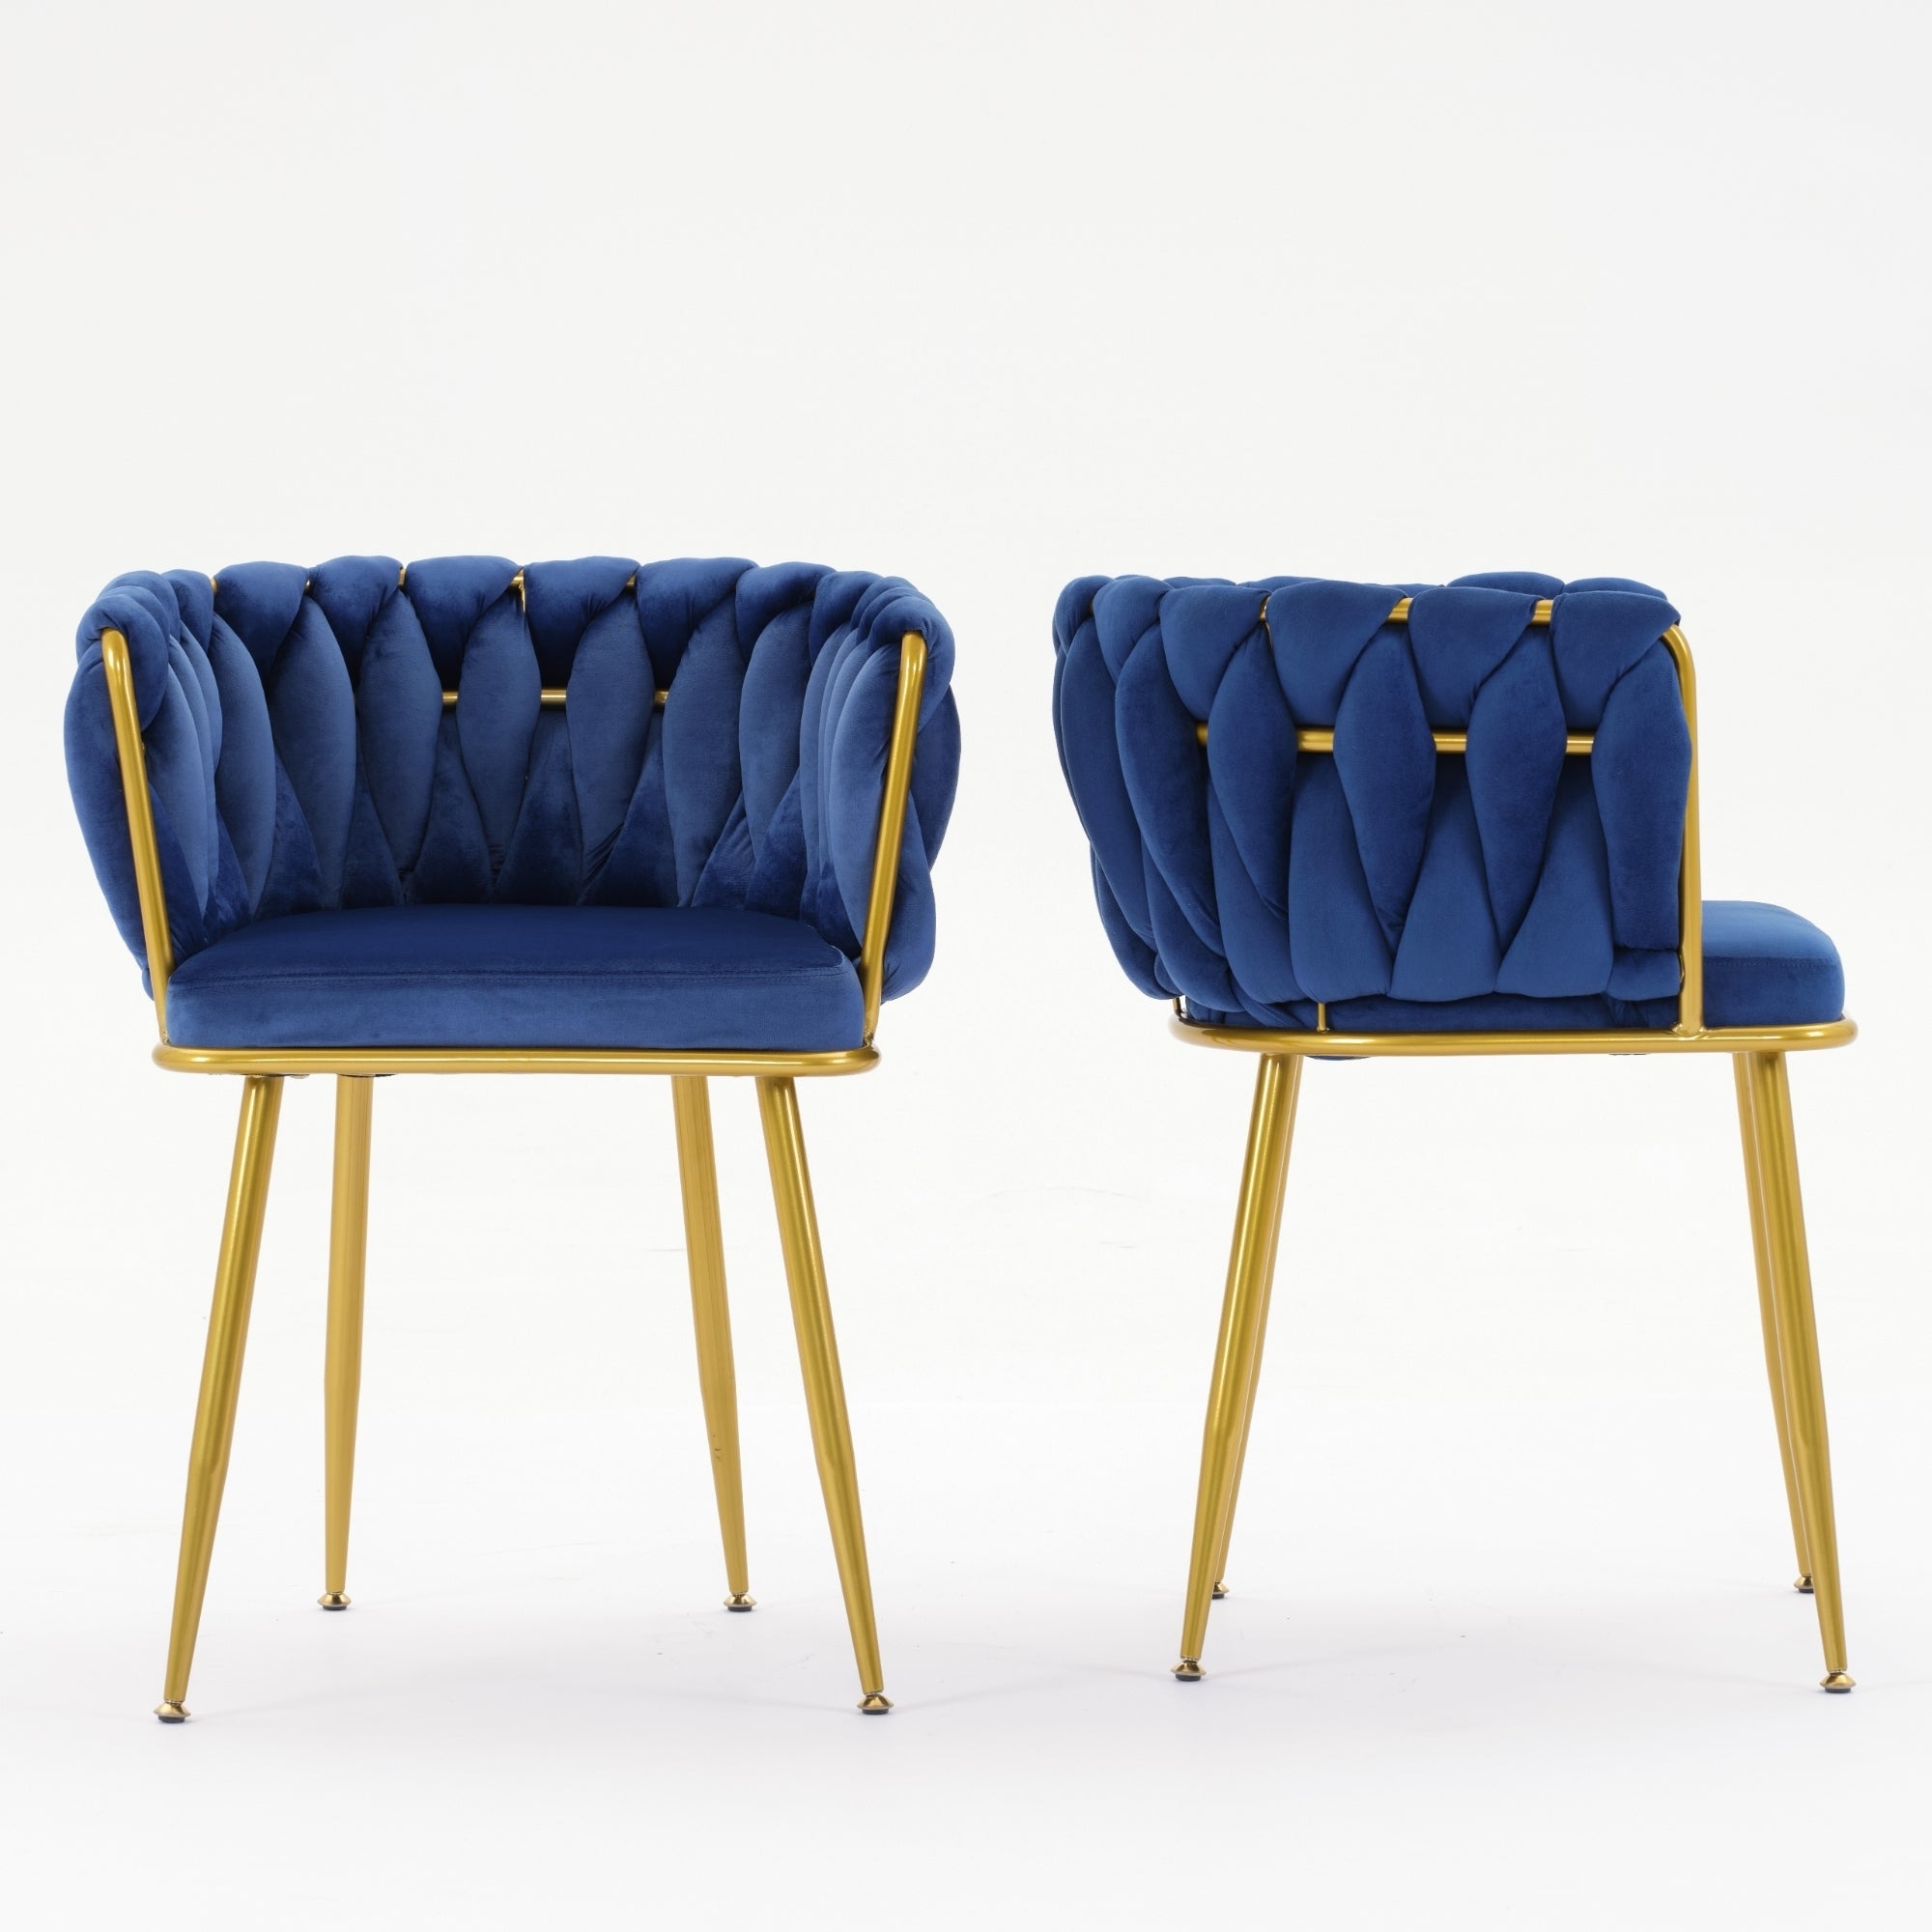 Velvet--Chair-with-Back-Arm--Blue-Set-of-2-Chairs-&-Seating